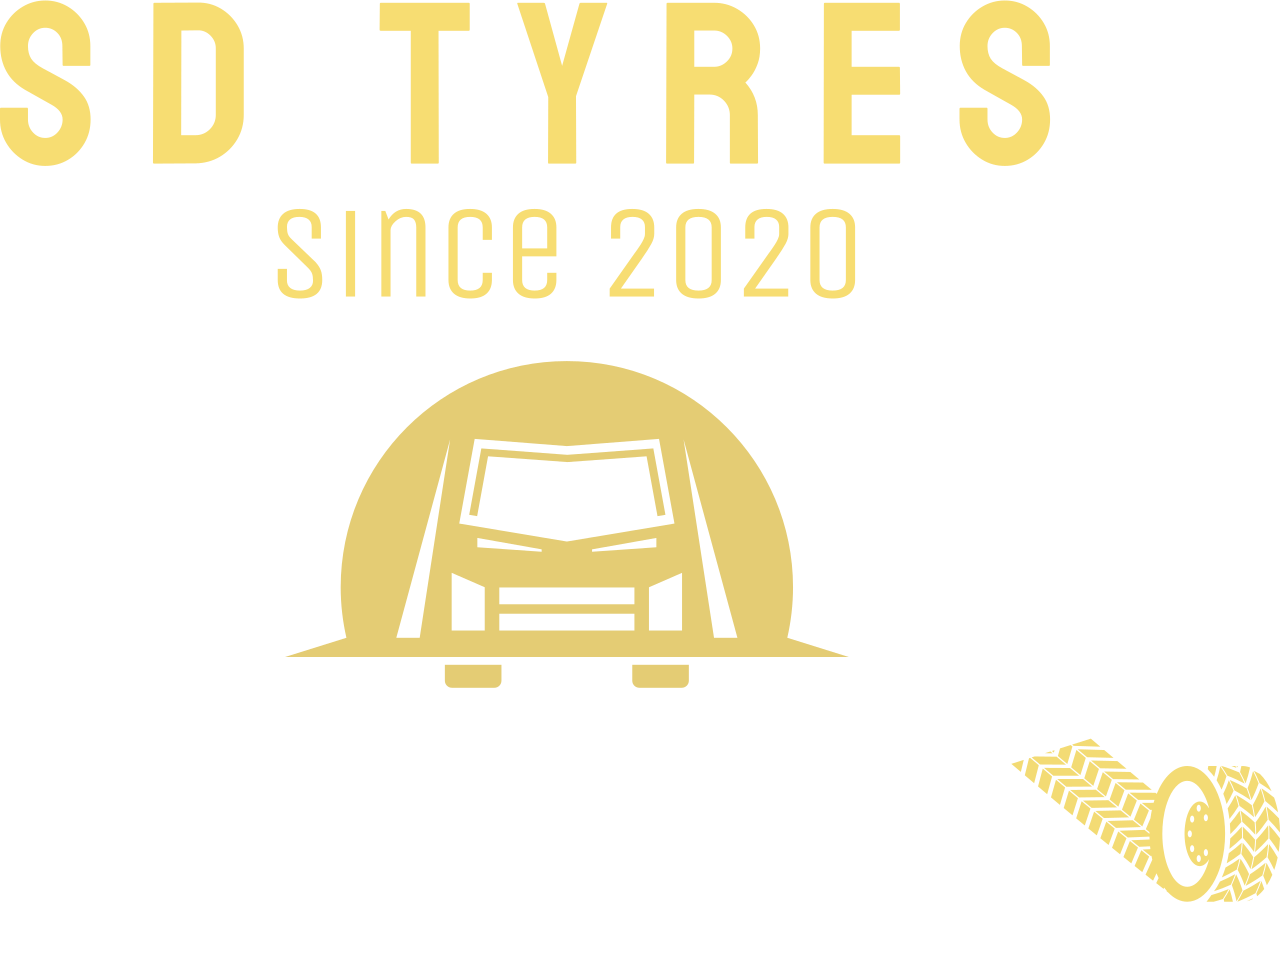 SD TYRES 's web page